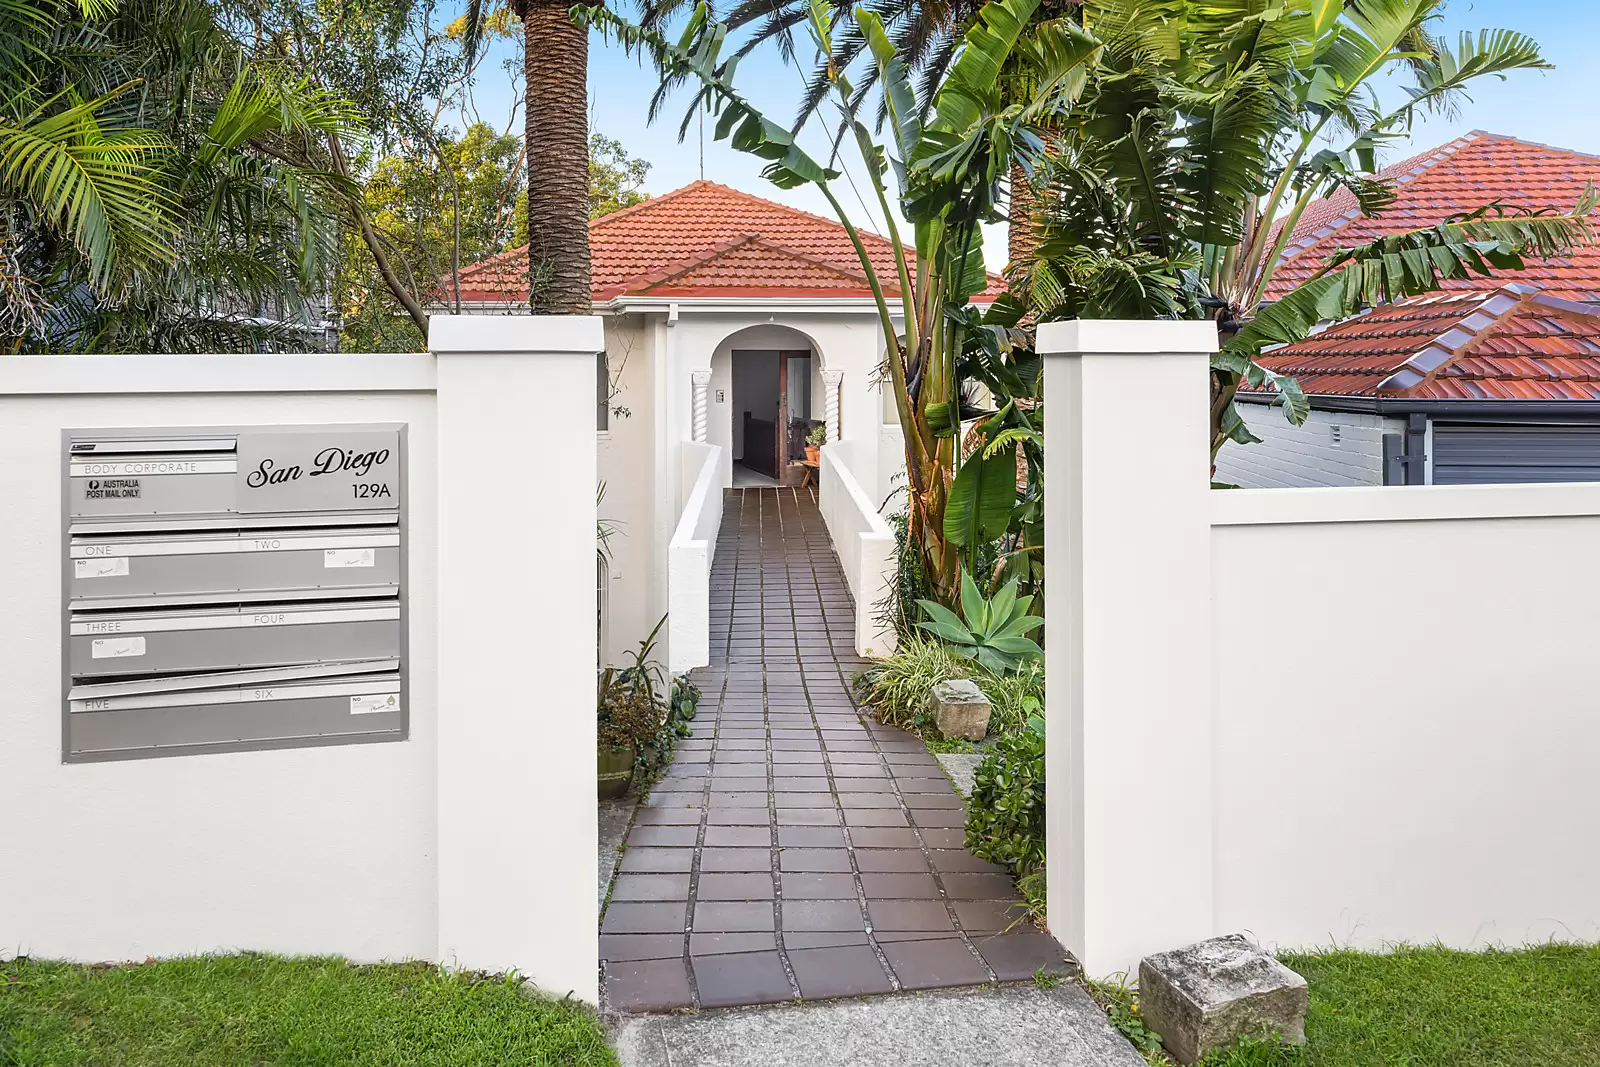 Photo #7: 3/129a Carrington Road, Coogee - Sold by Sydney Sotheby's International Realty